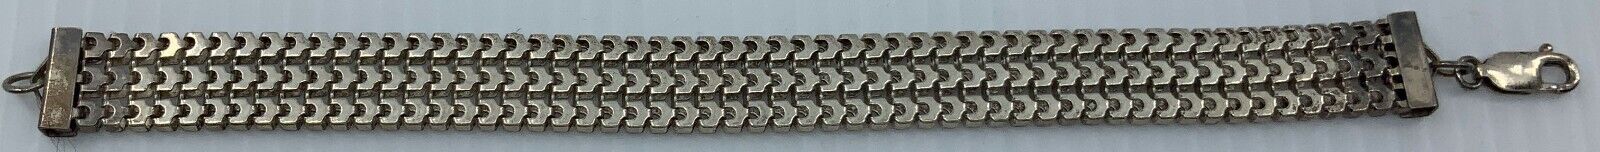 Vintage Jewelry OLD Sterling Silver Bracelet with Clasp 166mm GIFT DEAL i115108